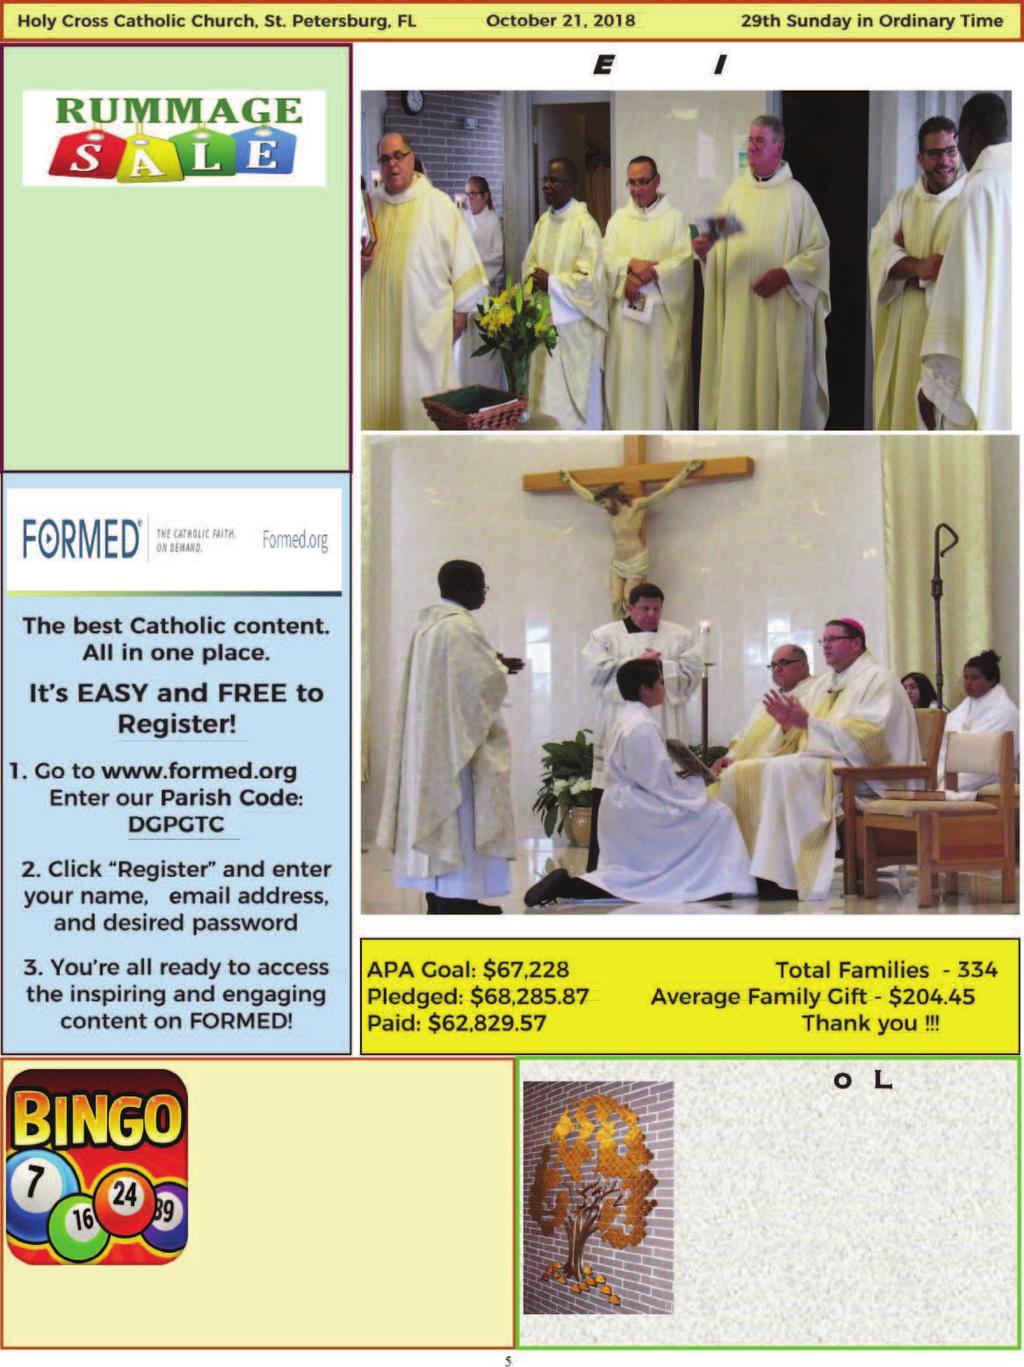 Women s Club Father mery s nstallation November 8, 9 and 10 Help will be needed beginning Monday after BINGO to set up the Parish Center and bring out boxes.